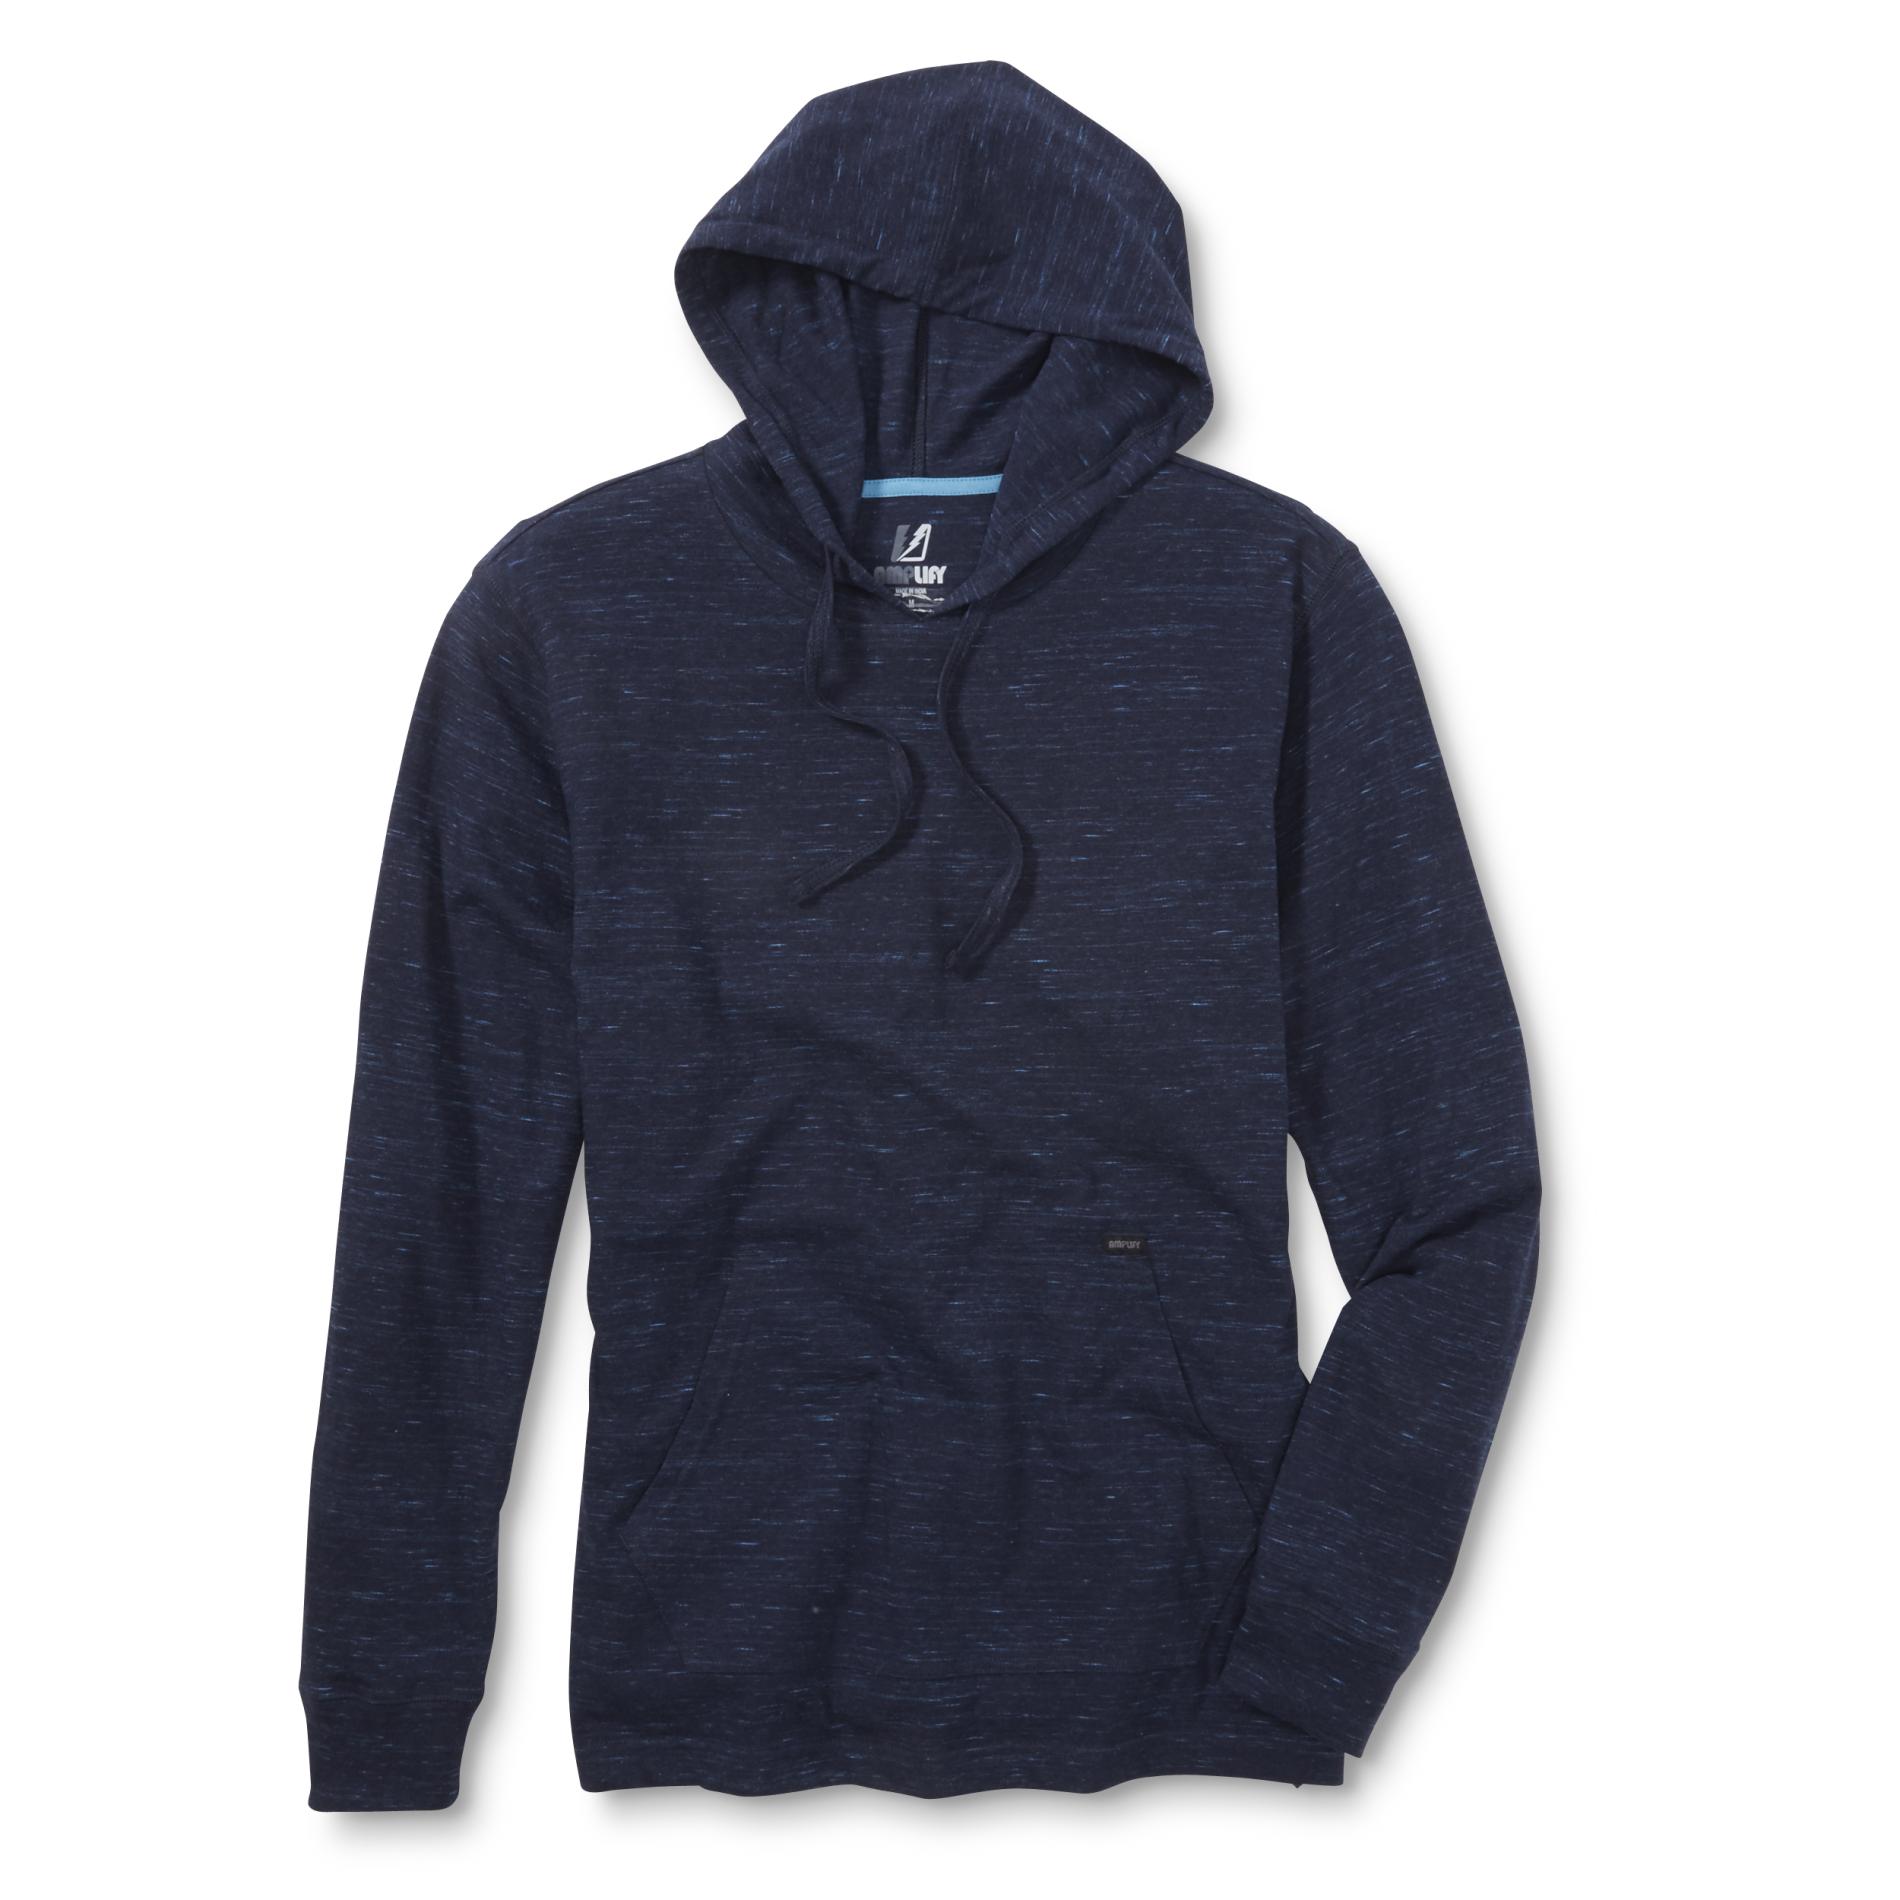 Amplify Young Men's Hoodie - Space Dyed